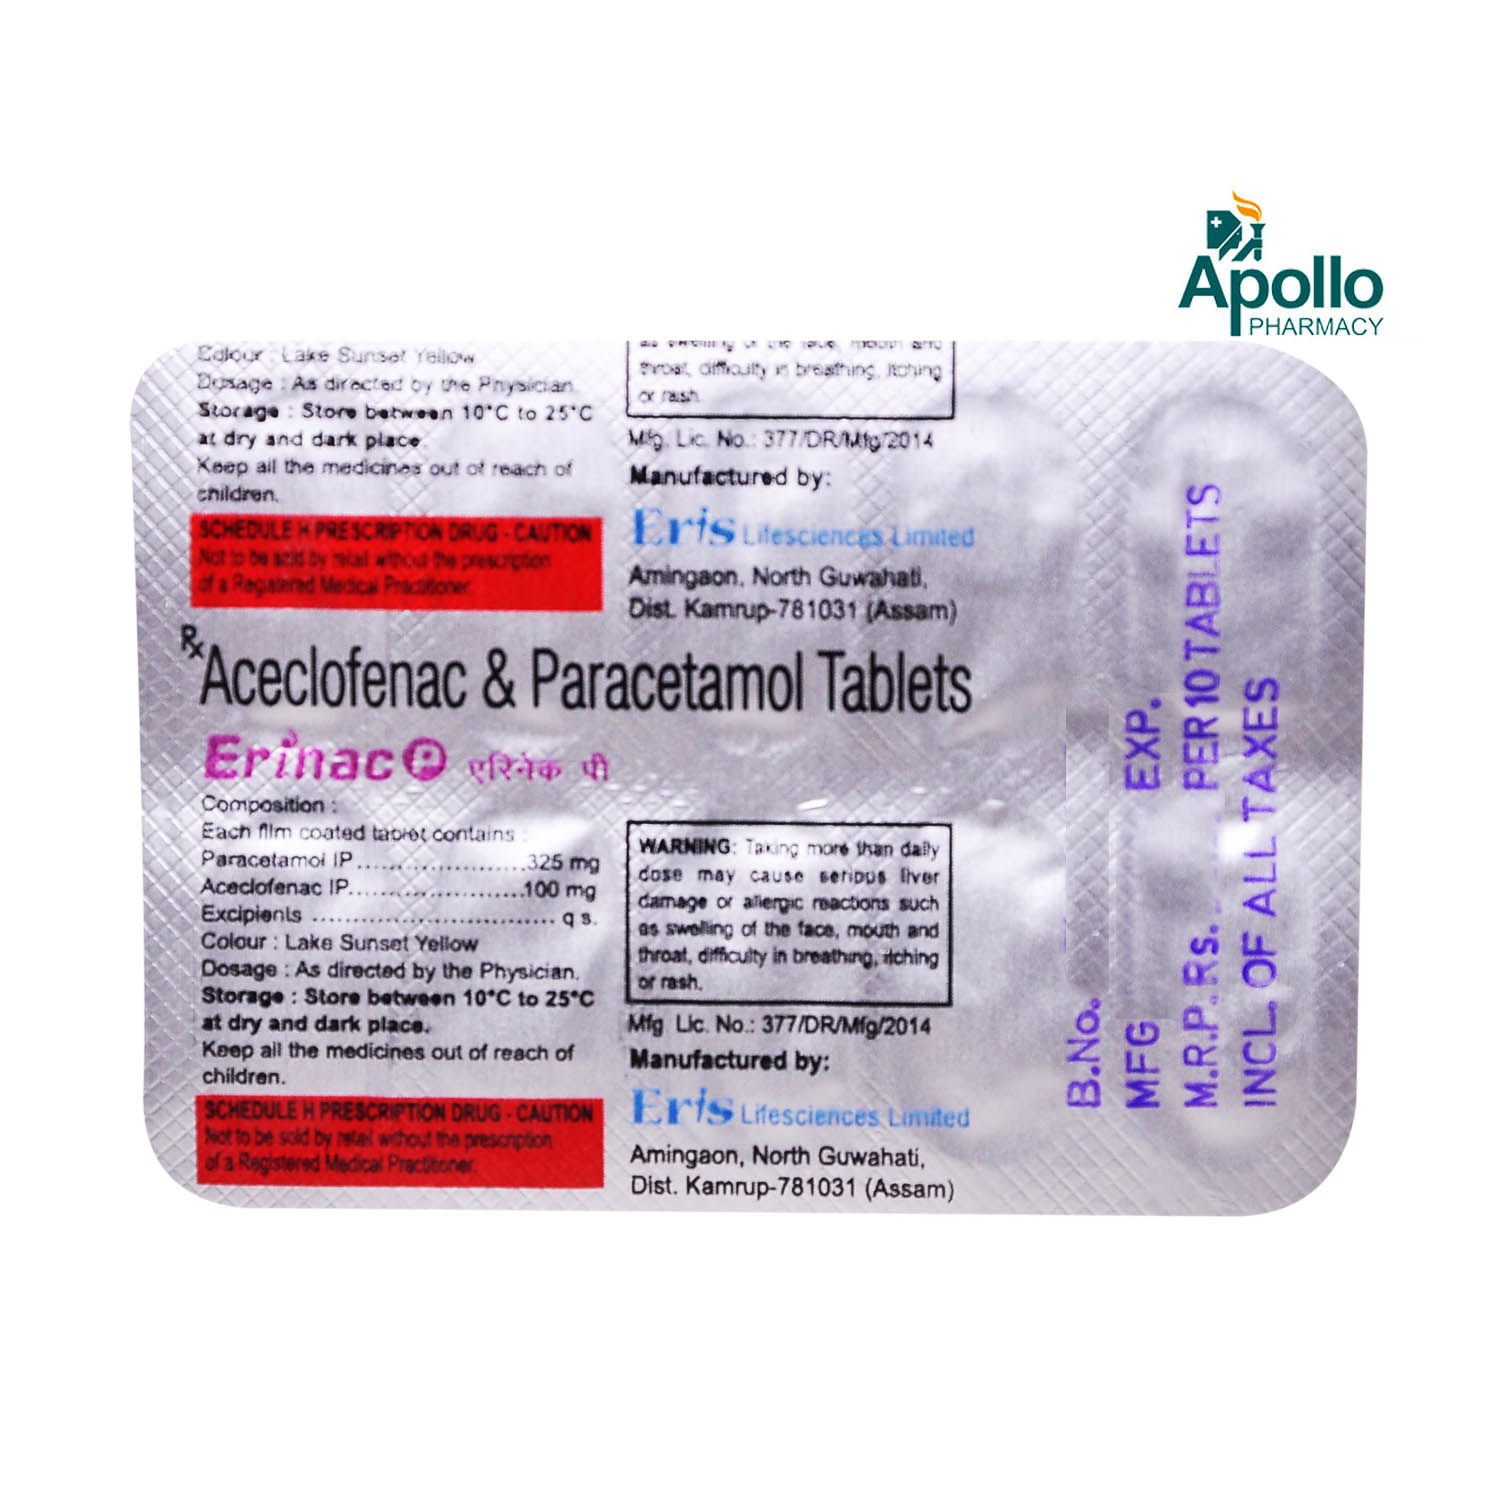 Erinac P Tablet 10's, Pack of 10 TabletS